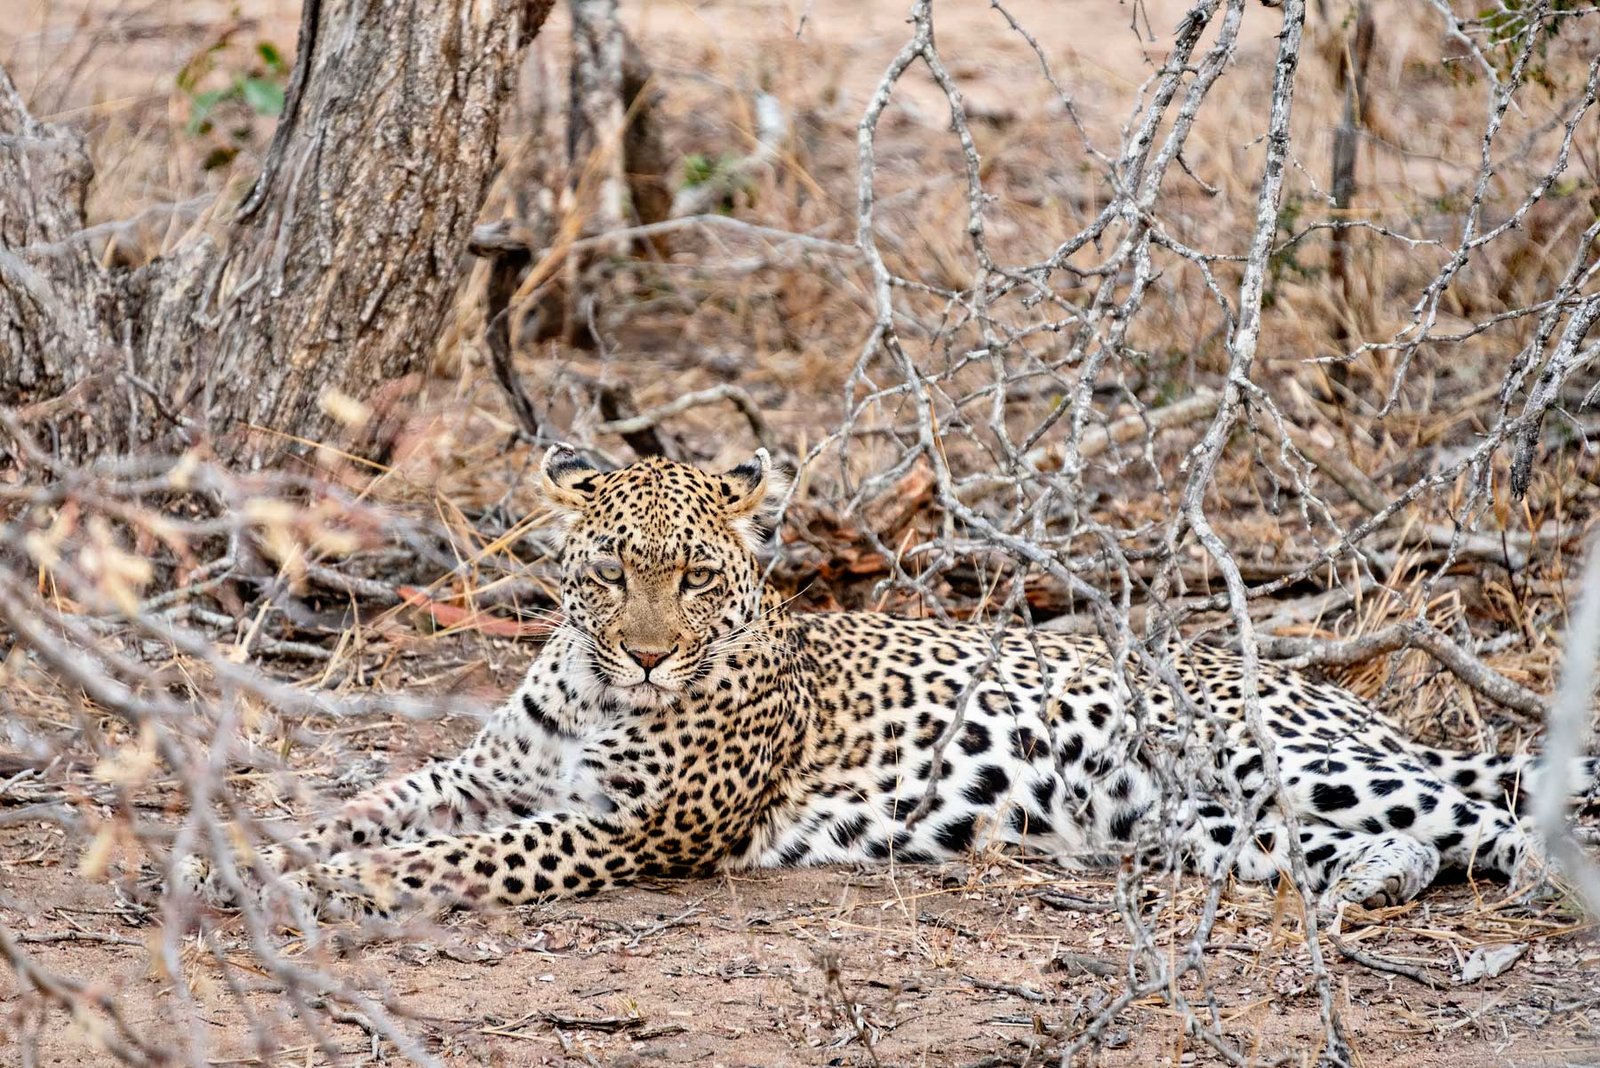 Leopard in South Africa - Check out my review of staying at Klaserie Sands River Camp, a beautiful boutique (4 suites), luxury safari lodge in Greater Kruger (Big 5), South Africa